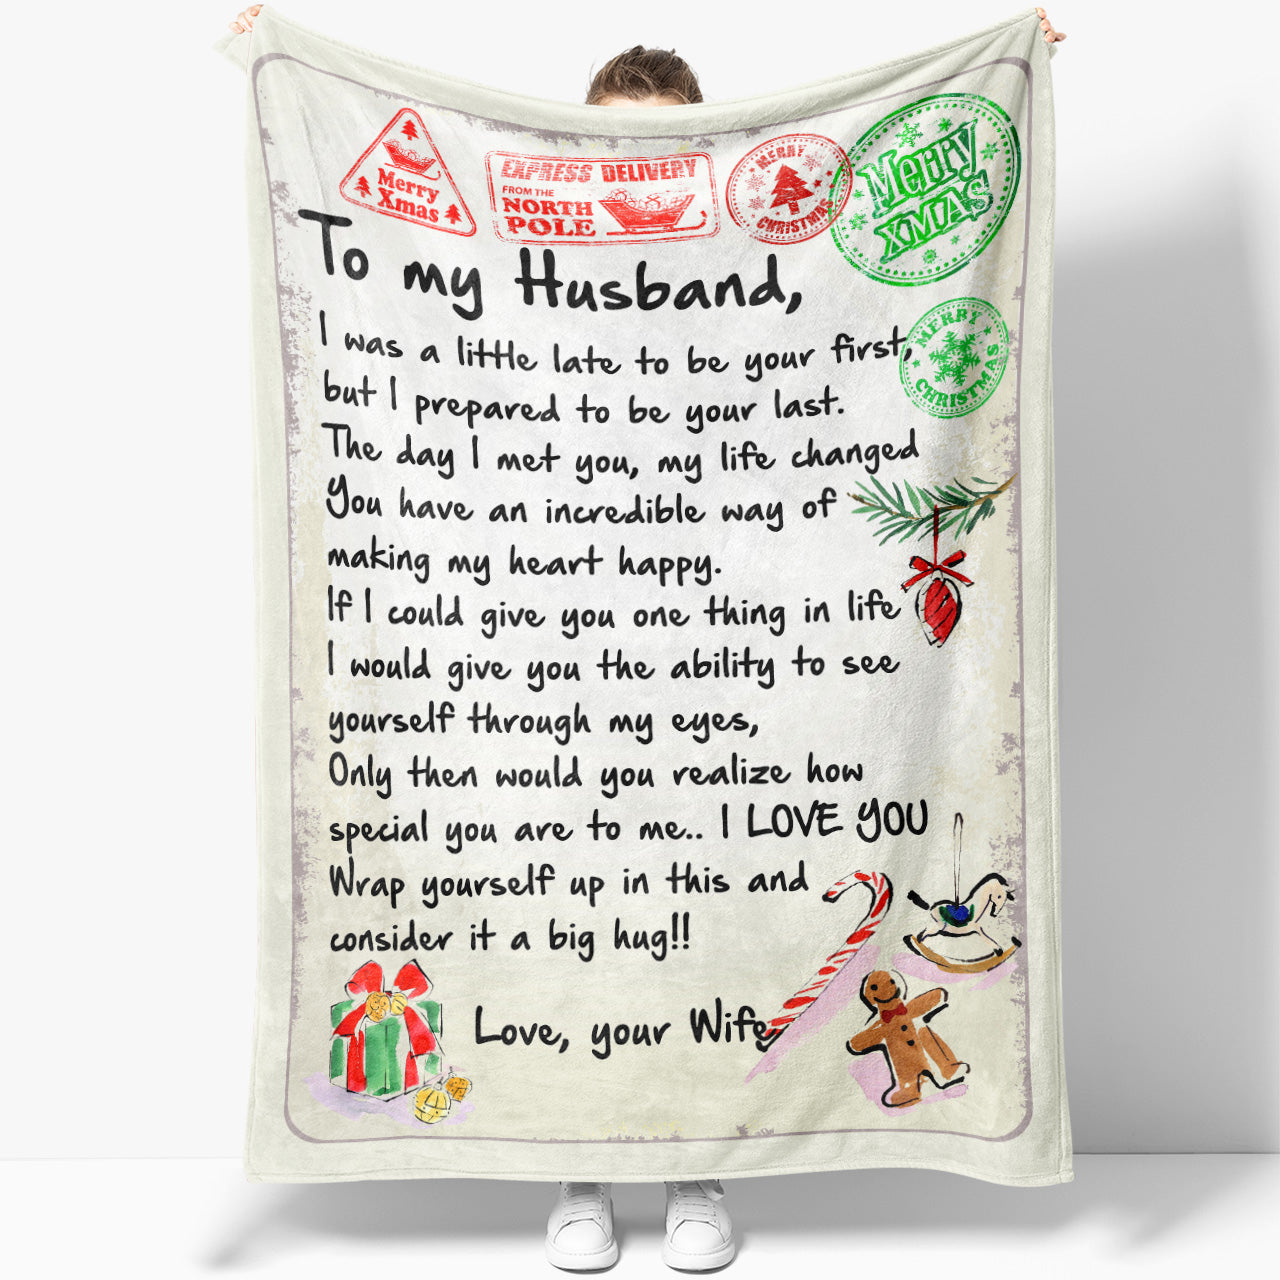 15+ Romantic Gifts For Husband That Will Win His Heart